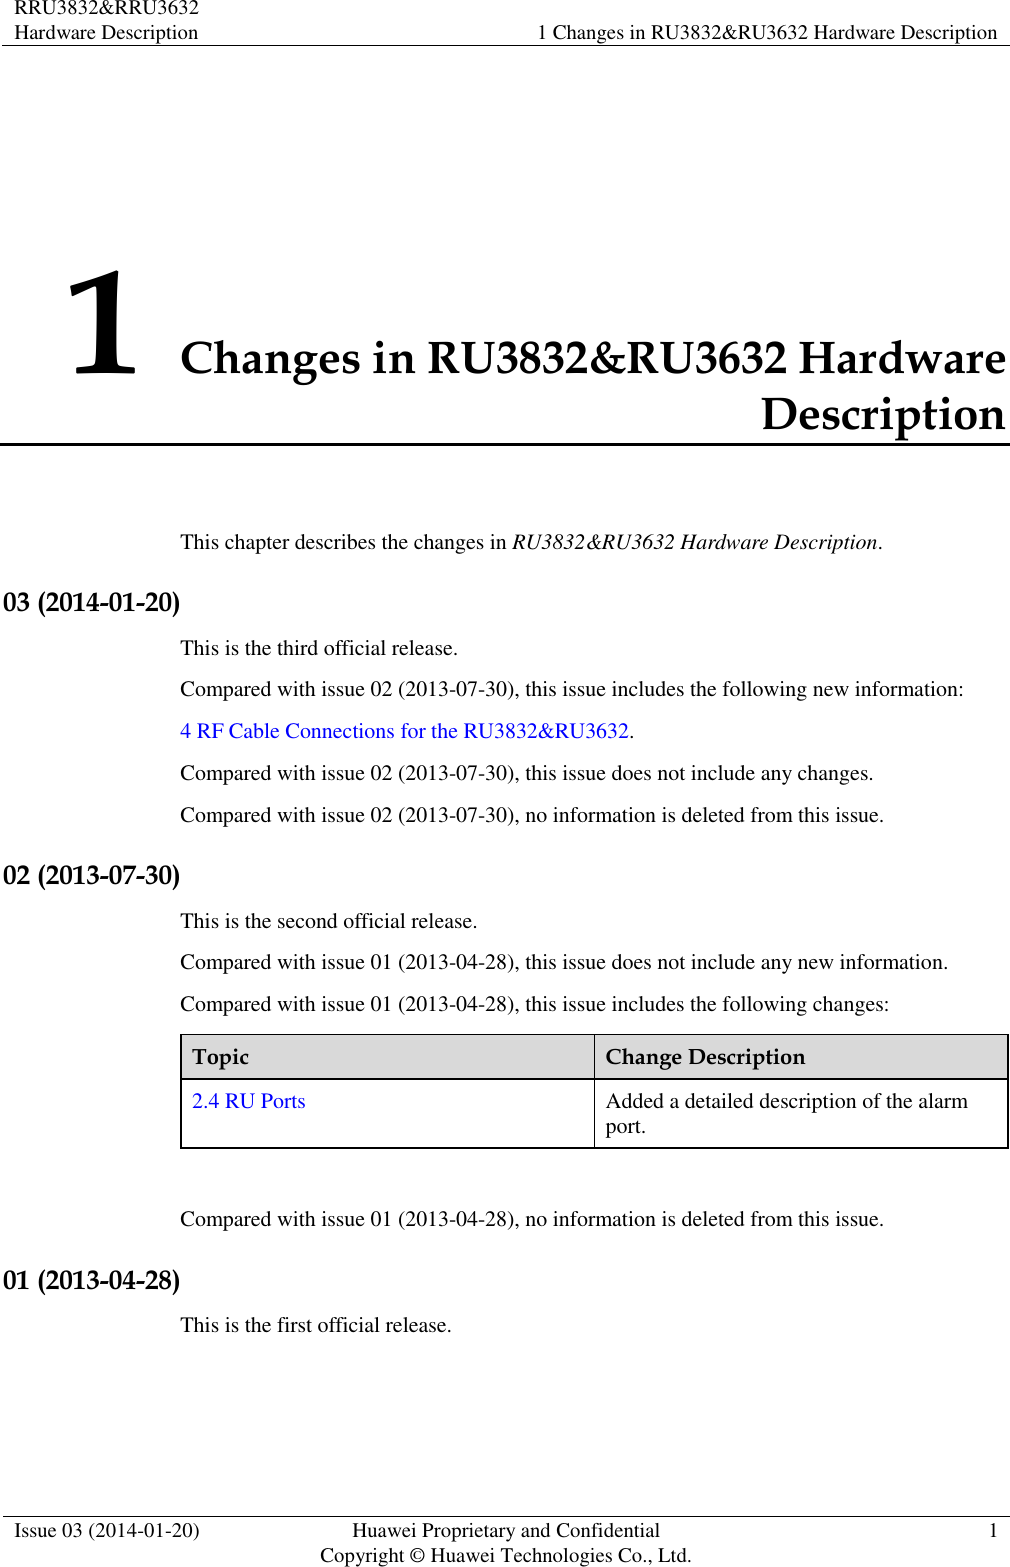 RRU3832&amp;RRU3632 Hardware Description 1 Changes in RU3832&amp;RU3632 Hardware Description  Issue 03 (2014-01-20) Huawei Proprietary and Confidential                                     Copyright © Huawei Technologies Co., Ltd. 1  1 Changes in RU3832&amp;RU3632 Hardware Description This chapter describes the changes in RU3832&amp;RU3632 Hardware Description. 03 (2014-01-20) This is the third official release. Compared with issue 02 (2013-07-30), this issue includes the following new information: 4 RF Cable Connections for the RU3832&amp;RU3632. Compared with issue 02 (2013-07-30), this issue does not include any changes. Compared with issue 02 (2013-07-30), no information is deleted from this issue. 02 (2013-07-30) This is the second official release. Compared with issue 01 (2013-04-28), this issue does not include any new information. Compared with issue 01 (2013-04-28), this issue includes the following changes: Topic Change Description 2.4 RU Ports Added a detailed description of the alarm port.  Compared with issue 01 (2013-04-28), no information is deleted from this issue. 01 (2013-04-28) This is the first official release. 